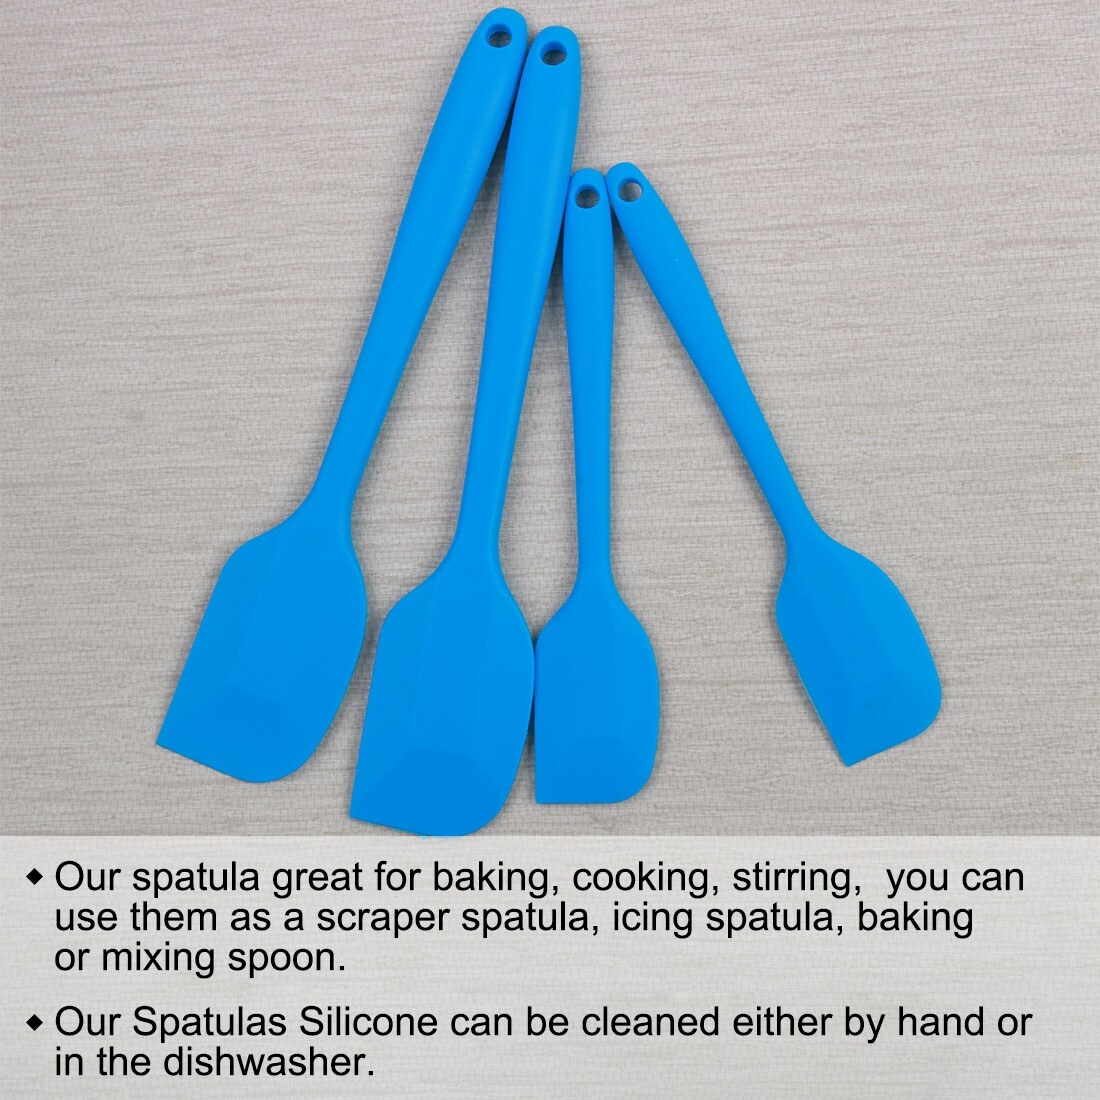 https://ak1.ostkcdn.com/images/products/is/images/direct/048c105b731d3ada3edf1176ca5e956dac978d46/Silicone-Spatula-Set-4-Pcs-Heat-Resistant-Non-scratch-Kitchen-Turner-Non-Stick-Spatula-for-Cooking-Mixing-Blue.jpg